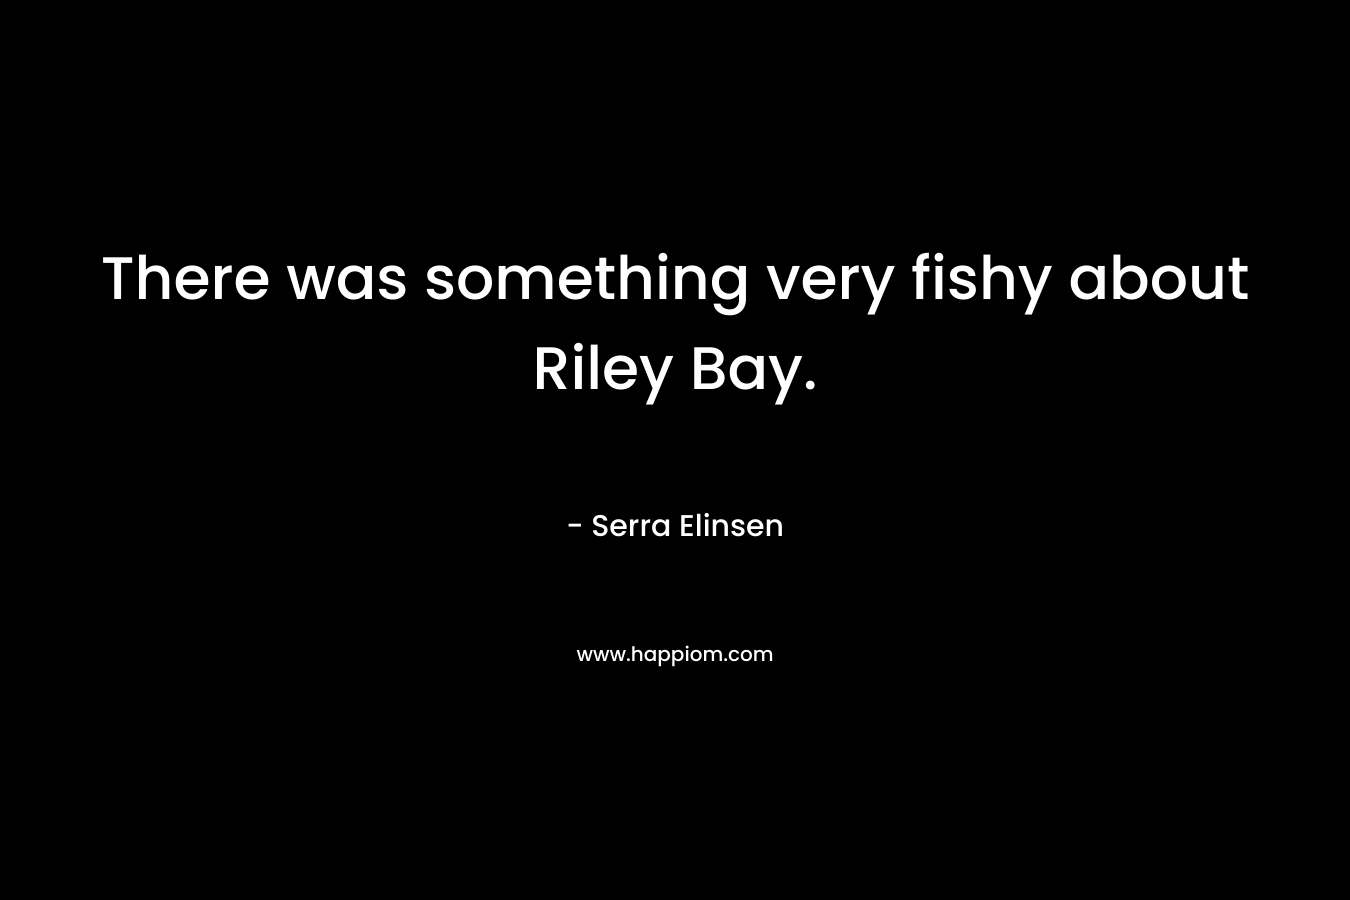 There was something very fishy about Riley Bay.